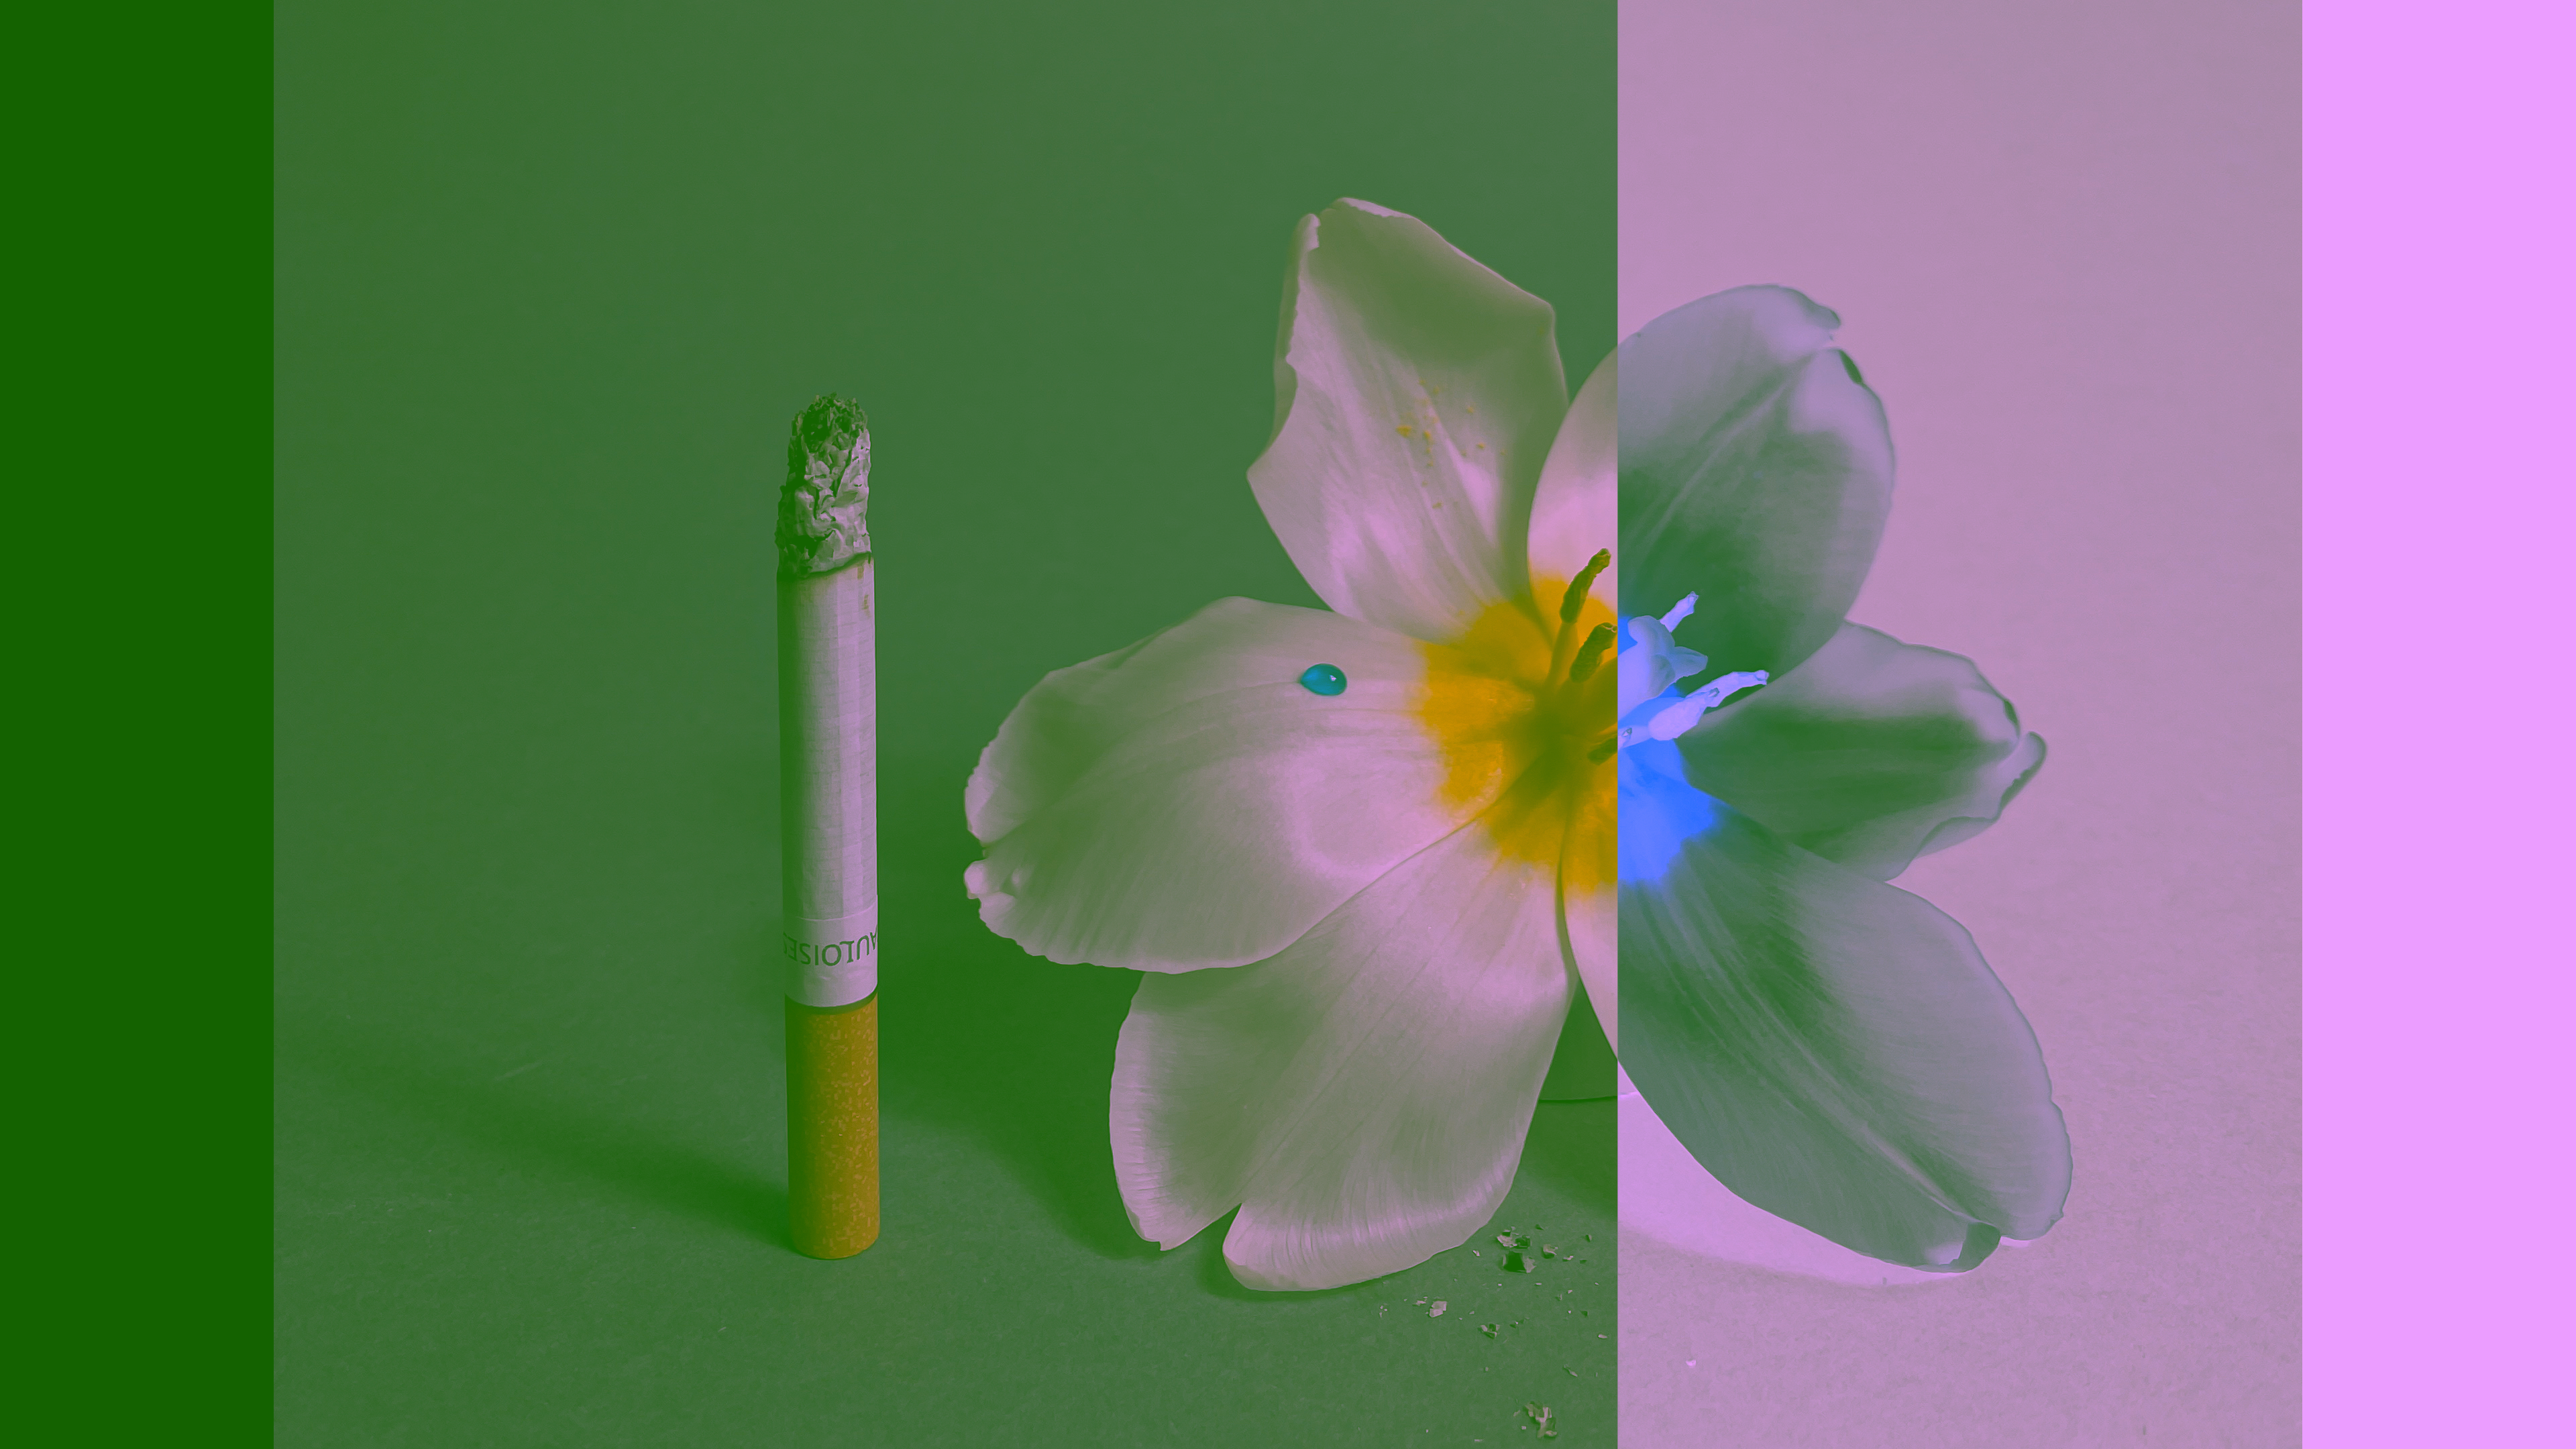 A stilllifearchive photograph of a lily flower with a cigarette, with an exclusion blend-mode effect, on a half green, half pink background